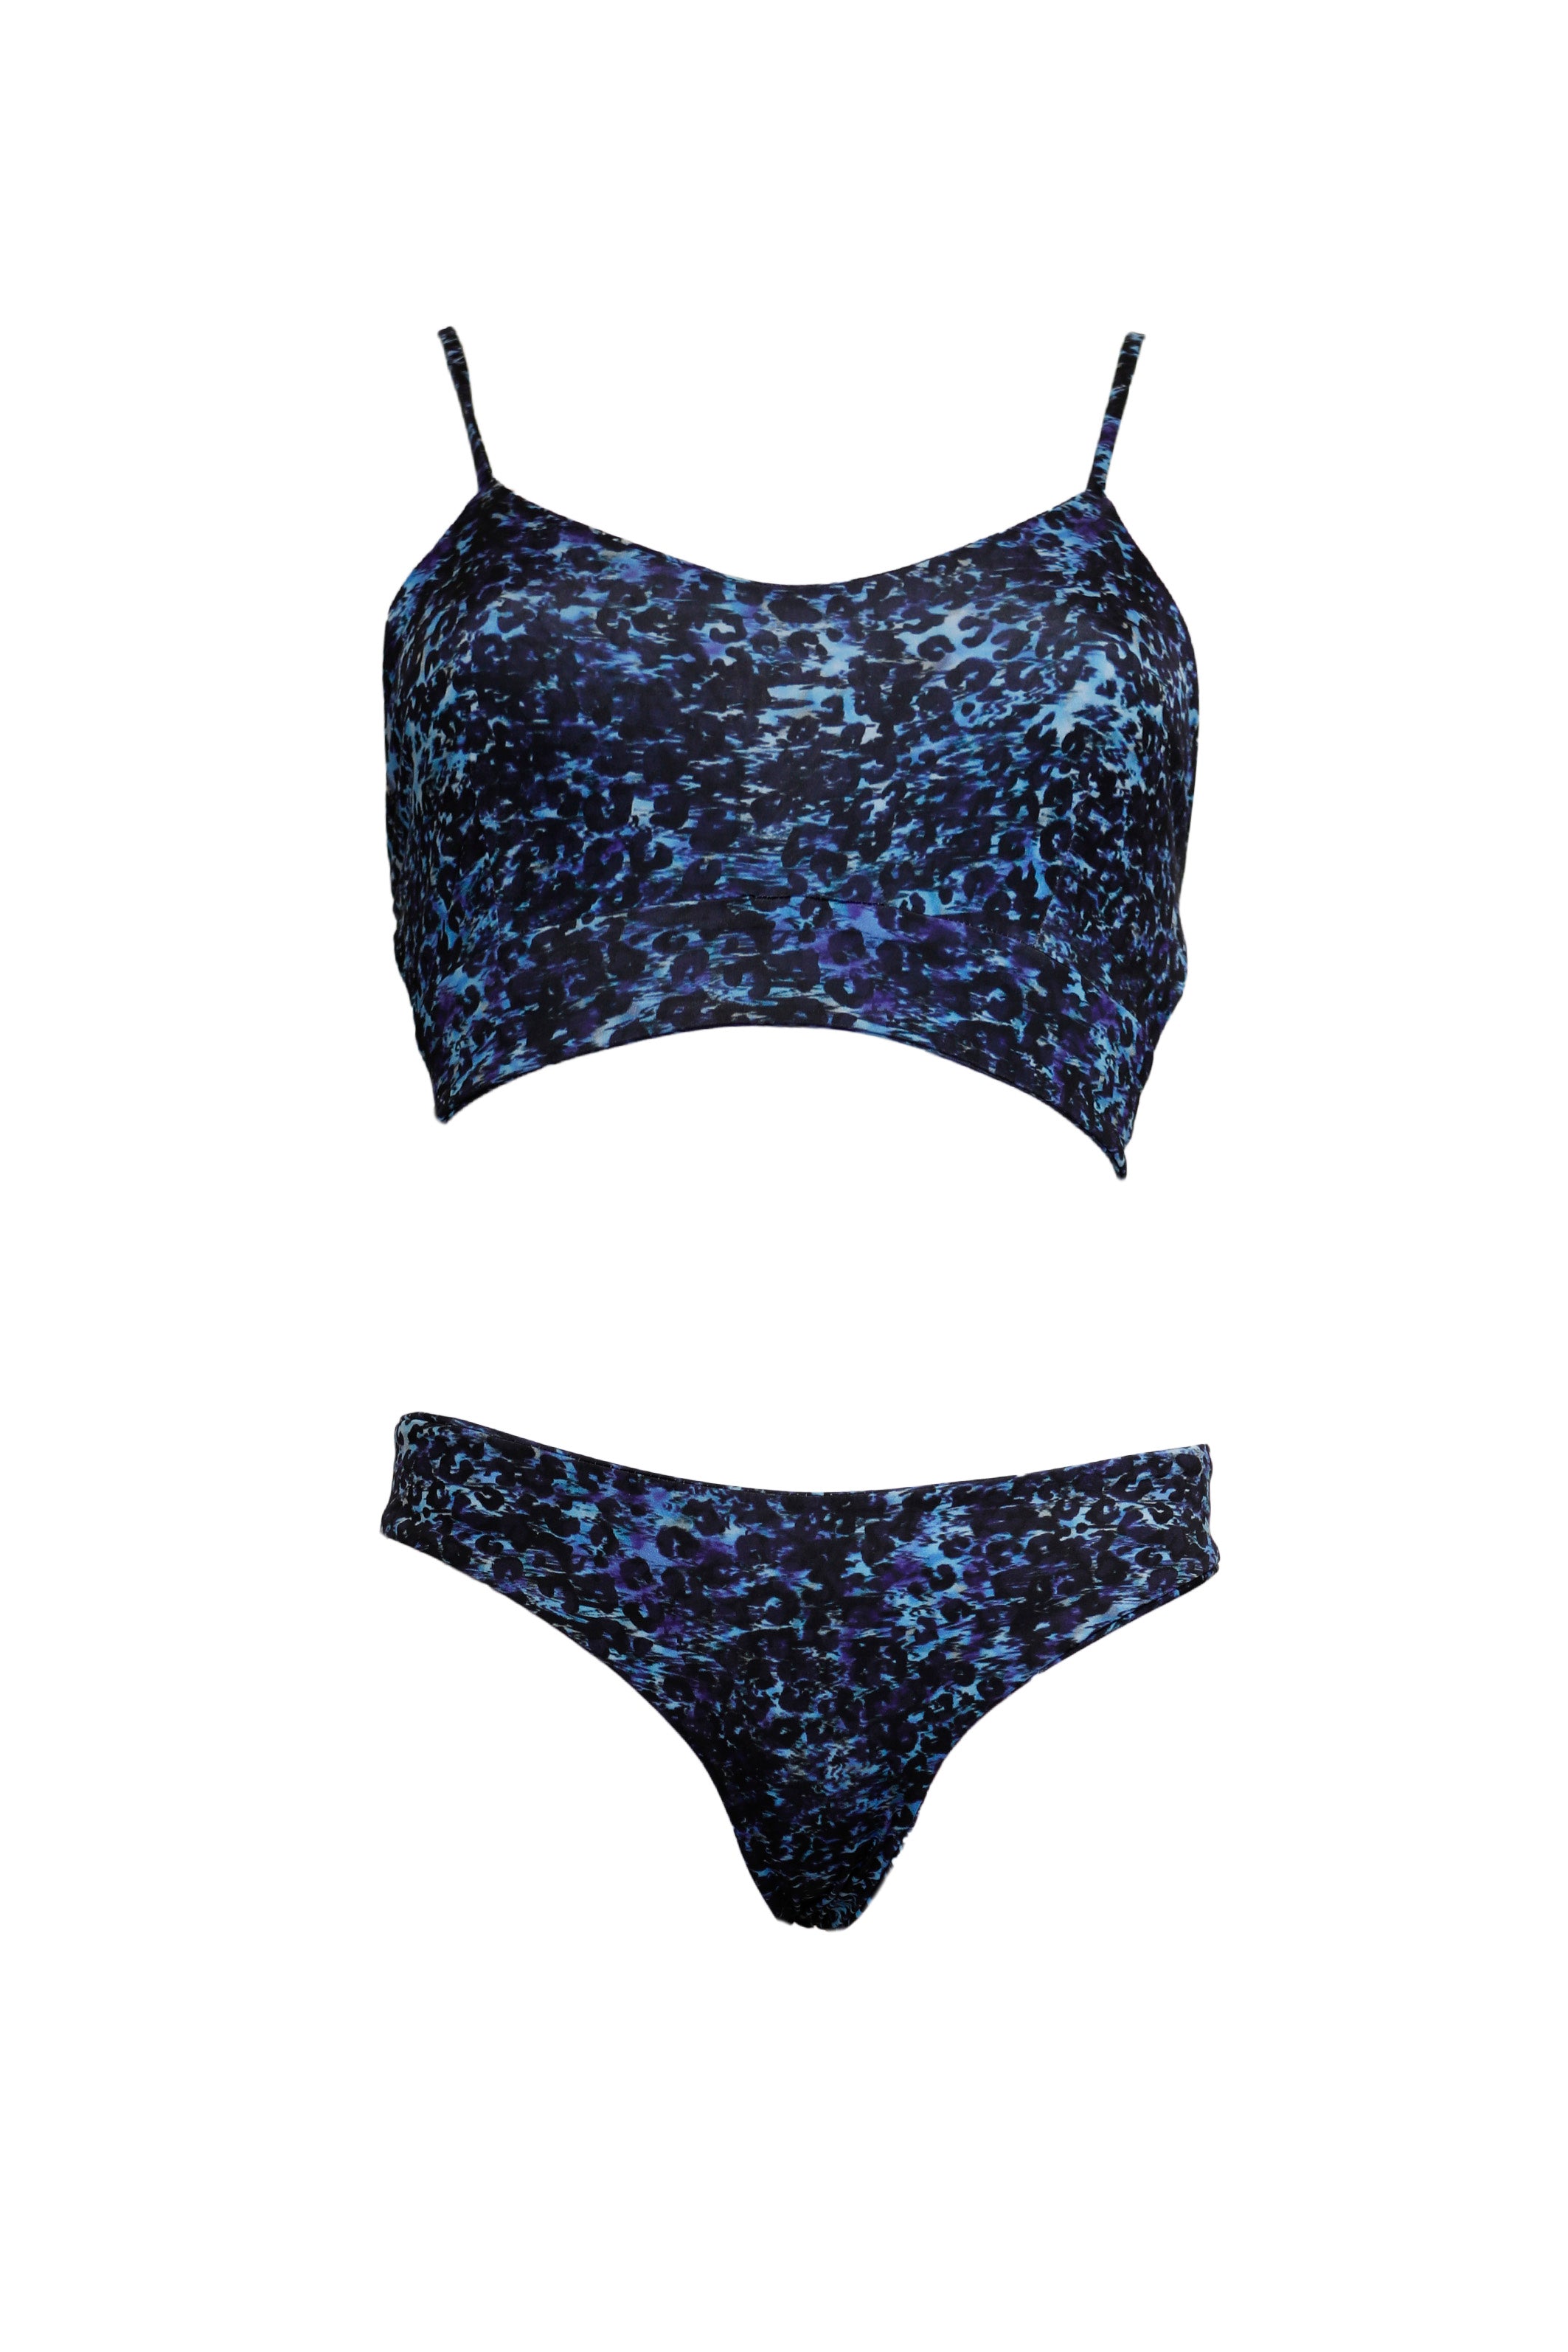 CECILIA - two-piece swimsuit in blue animal print lycra